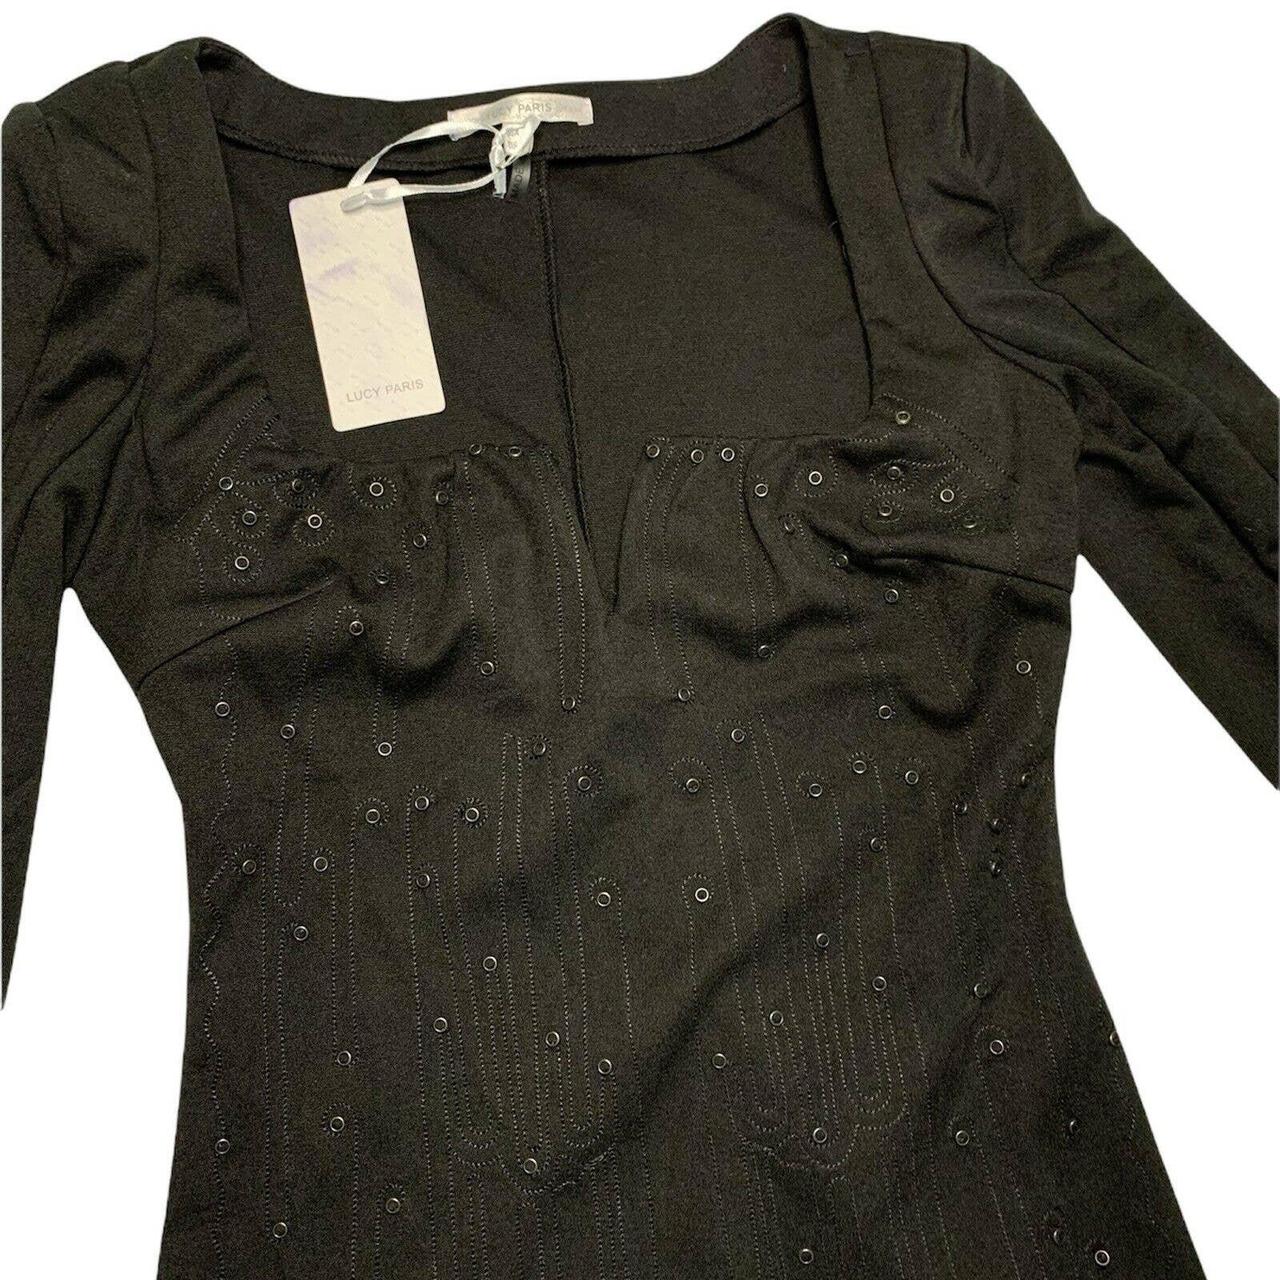 Product Image 3 - NWT Lucy Paris 3/4 Sleeve